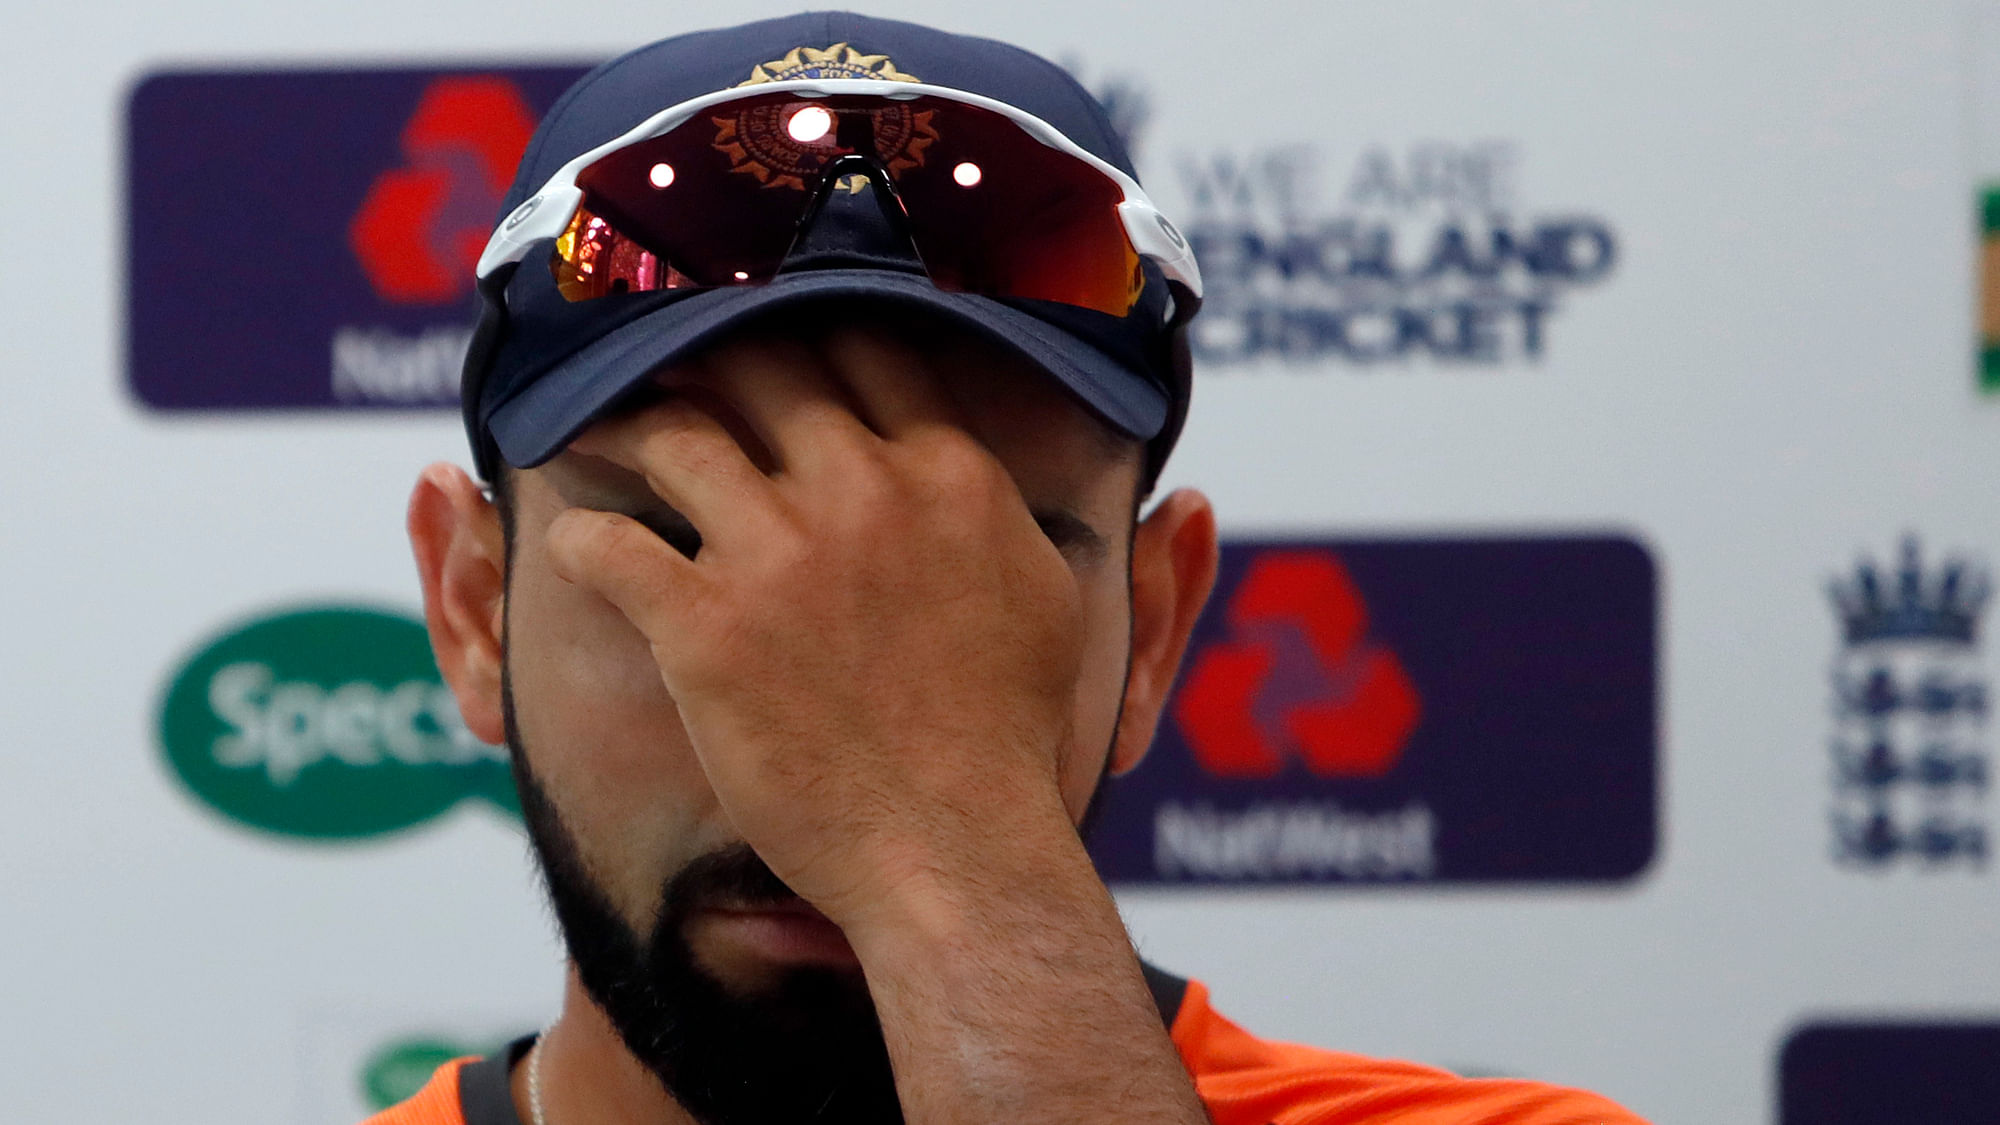 Indian skipper Virat Kohli spoke to the media after India’s big loss to England at Lord’s